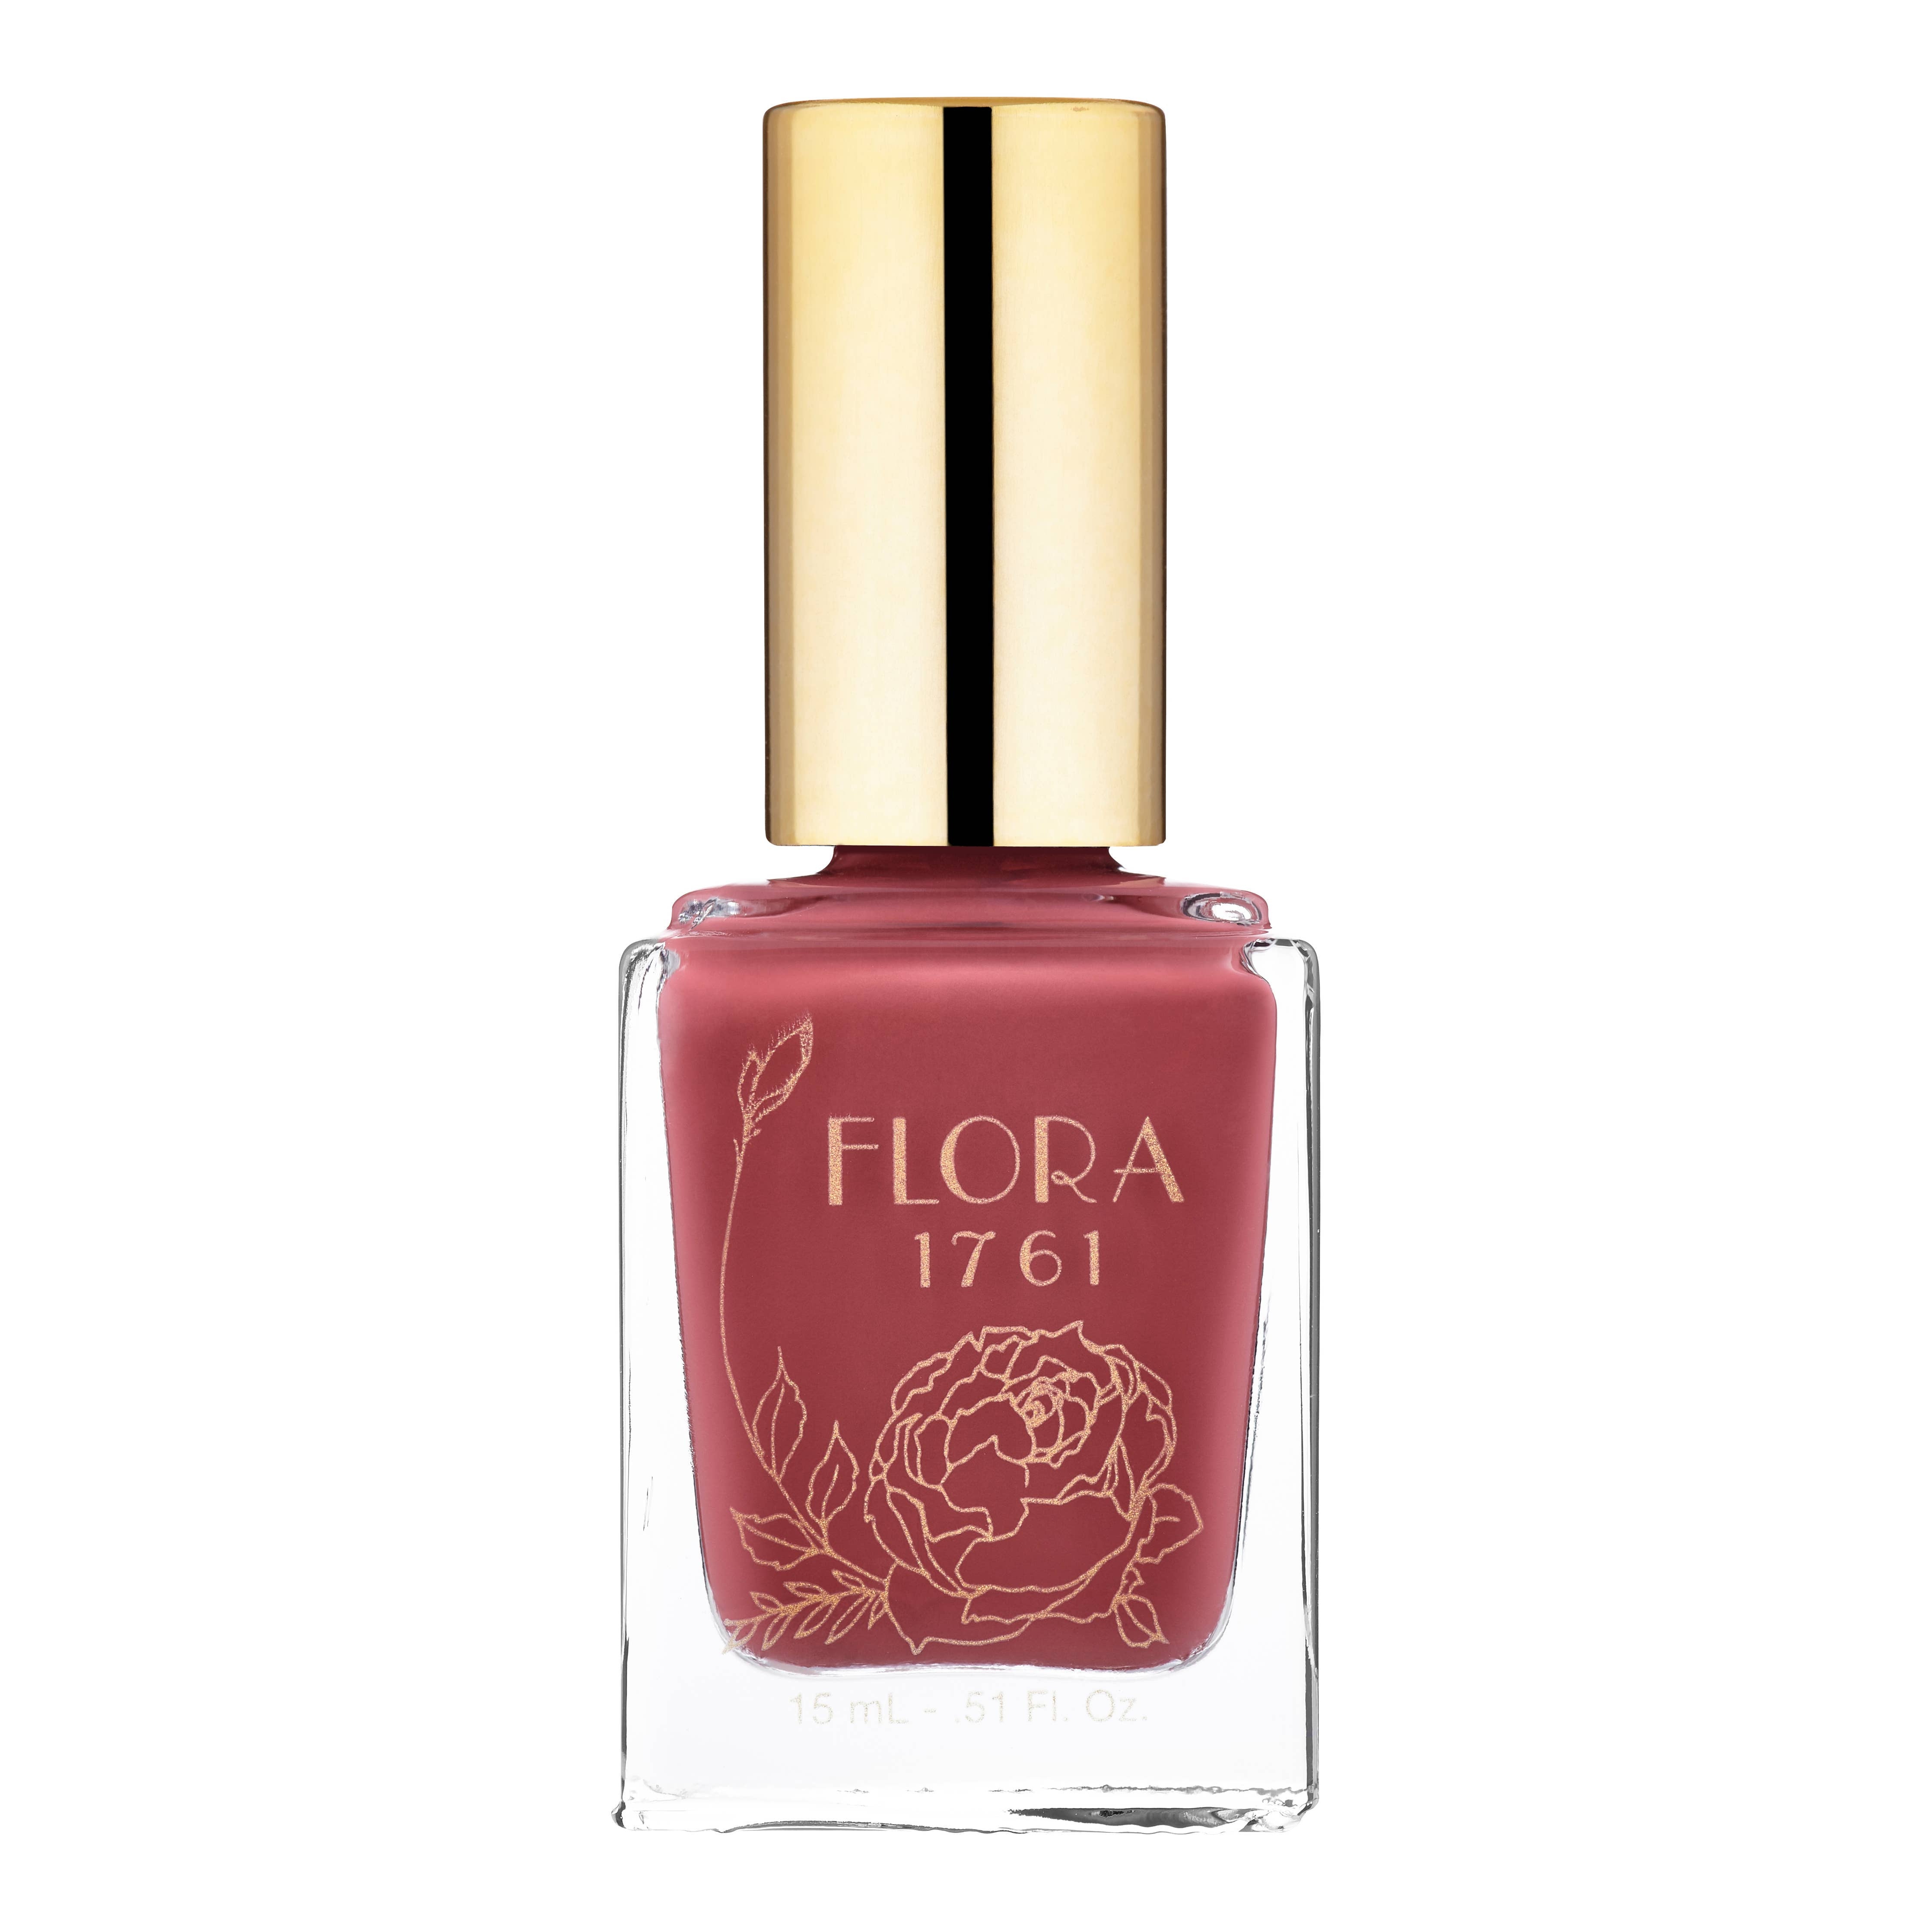 Nail Lacquer in Garden Rose